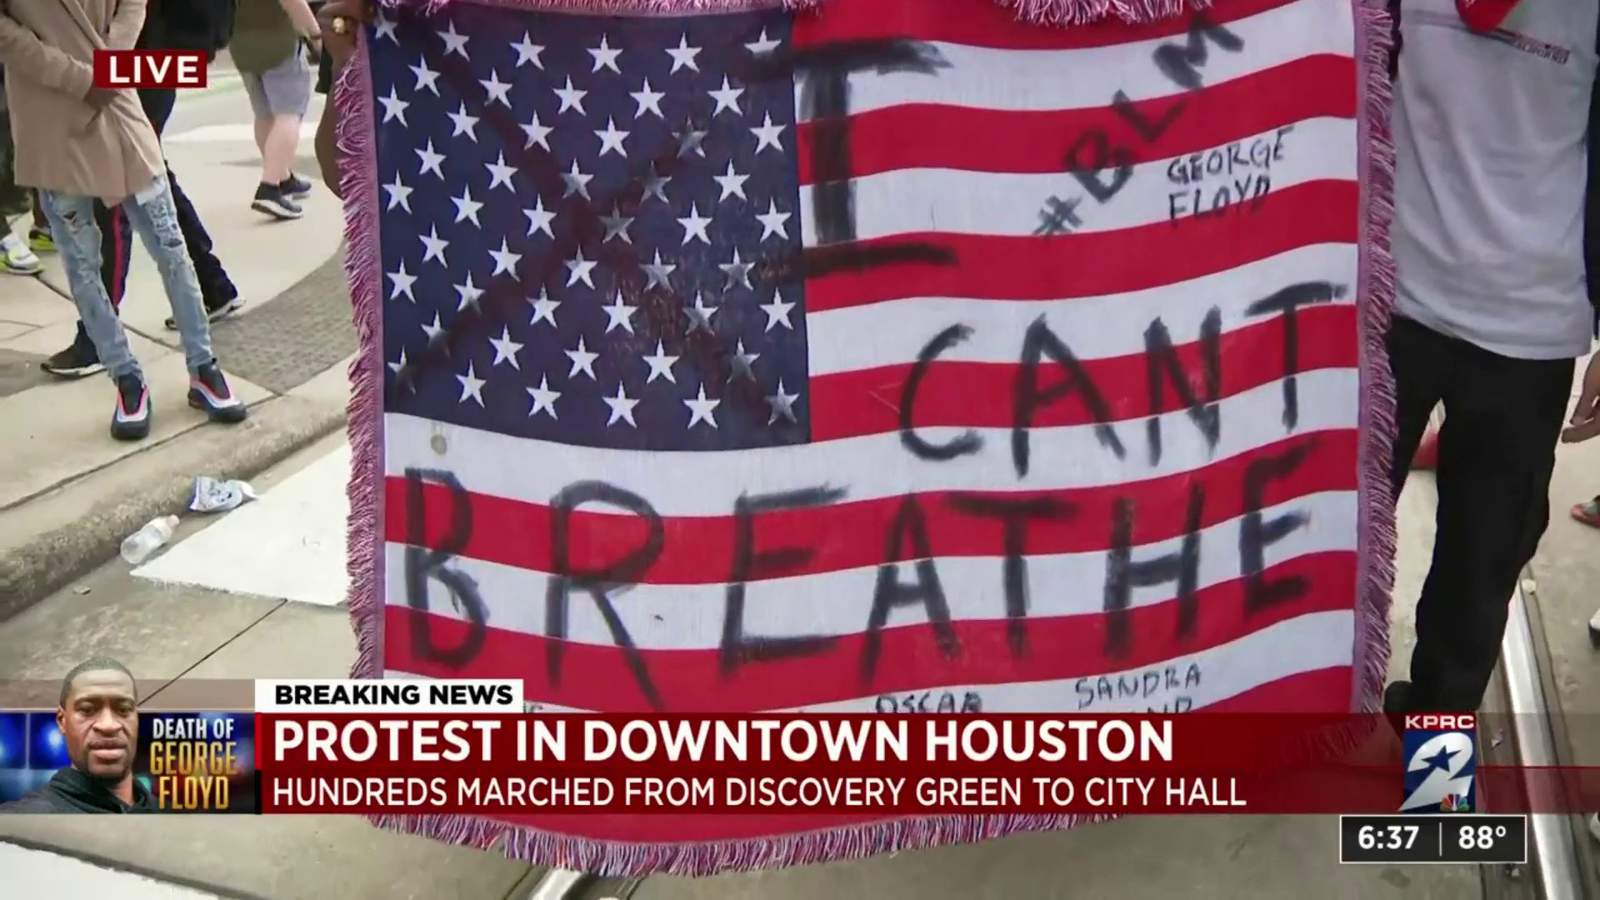 VIDEOS: Powerful moments from the Houston Black Lives Matter protest seeking justice for Houston native George Floyd